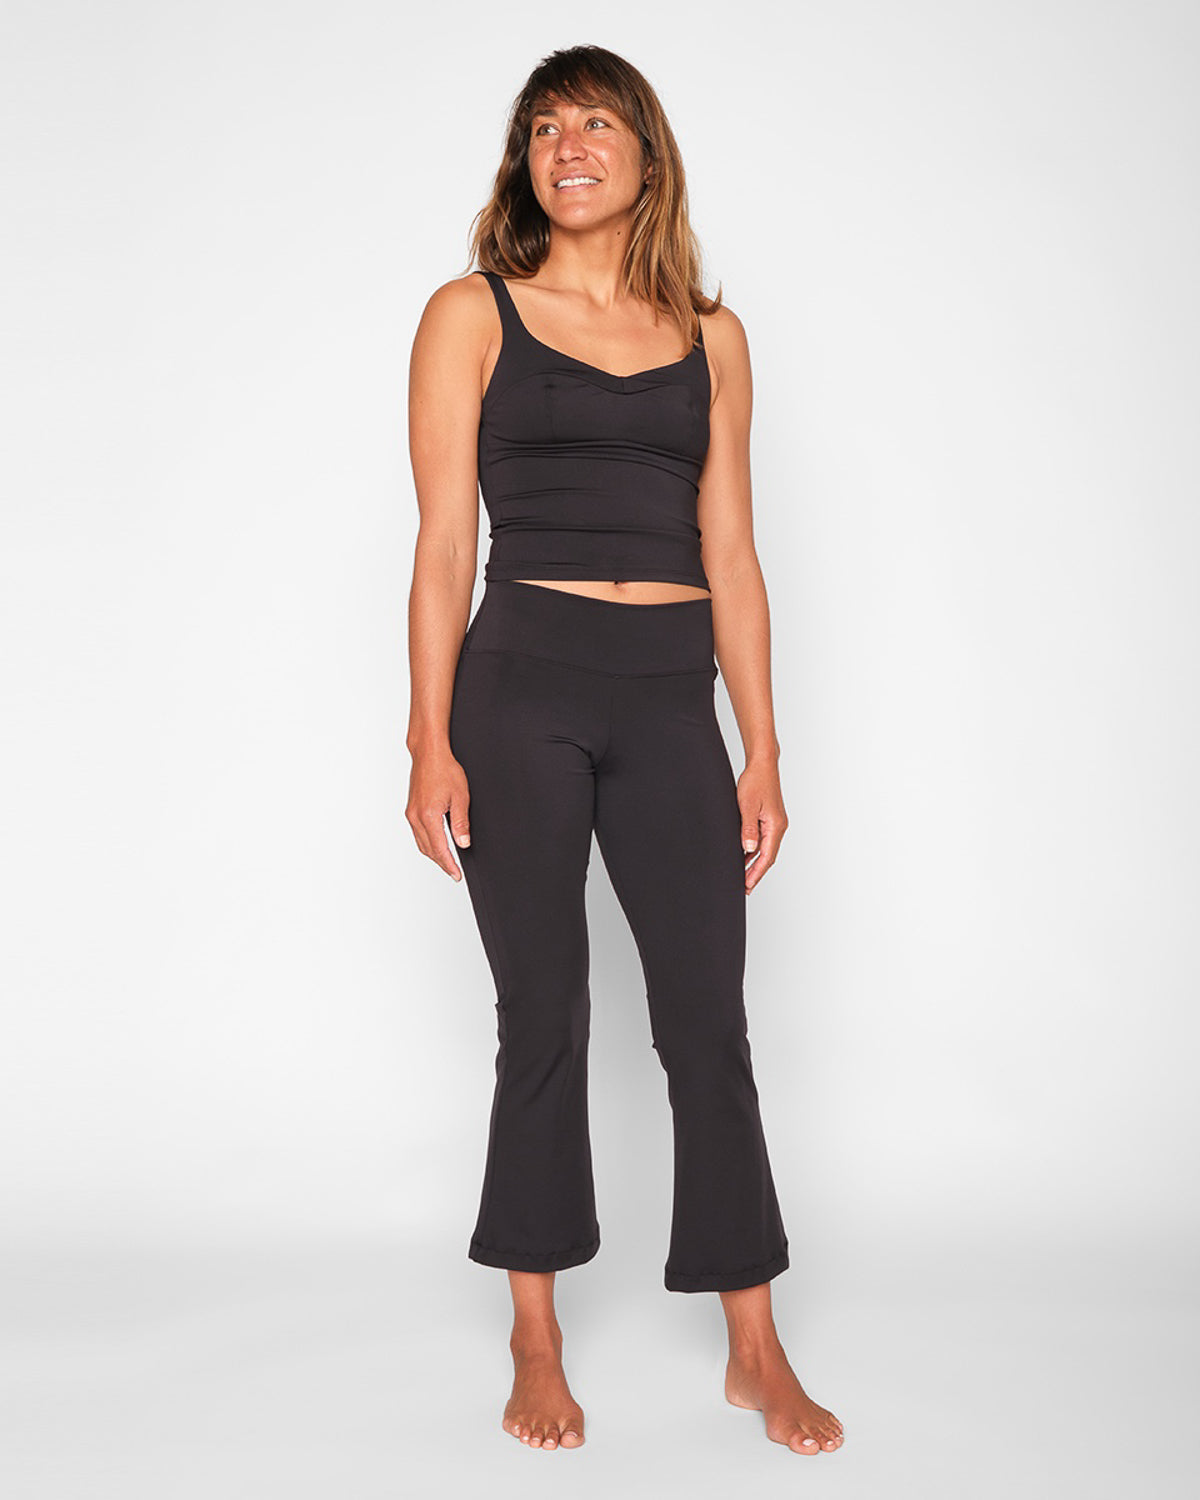 Bell Black Pants Apparel Clothing Sun Protective UV Protection